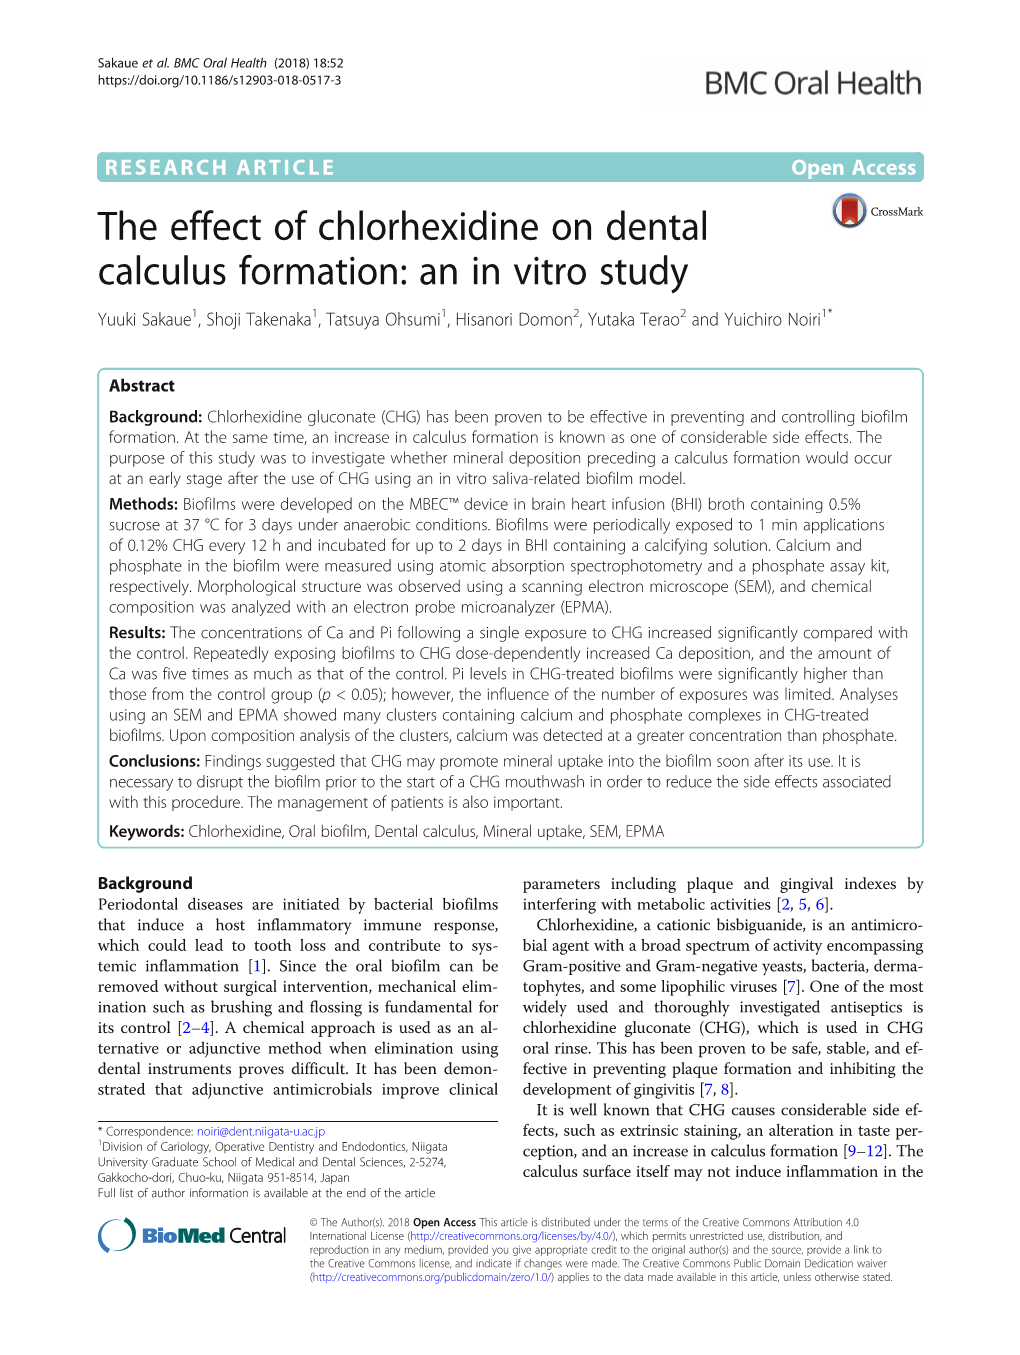 The Effect of Chlorhexidine on Dental Calculus Formation: an in Vitro Study